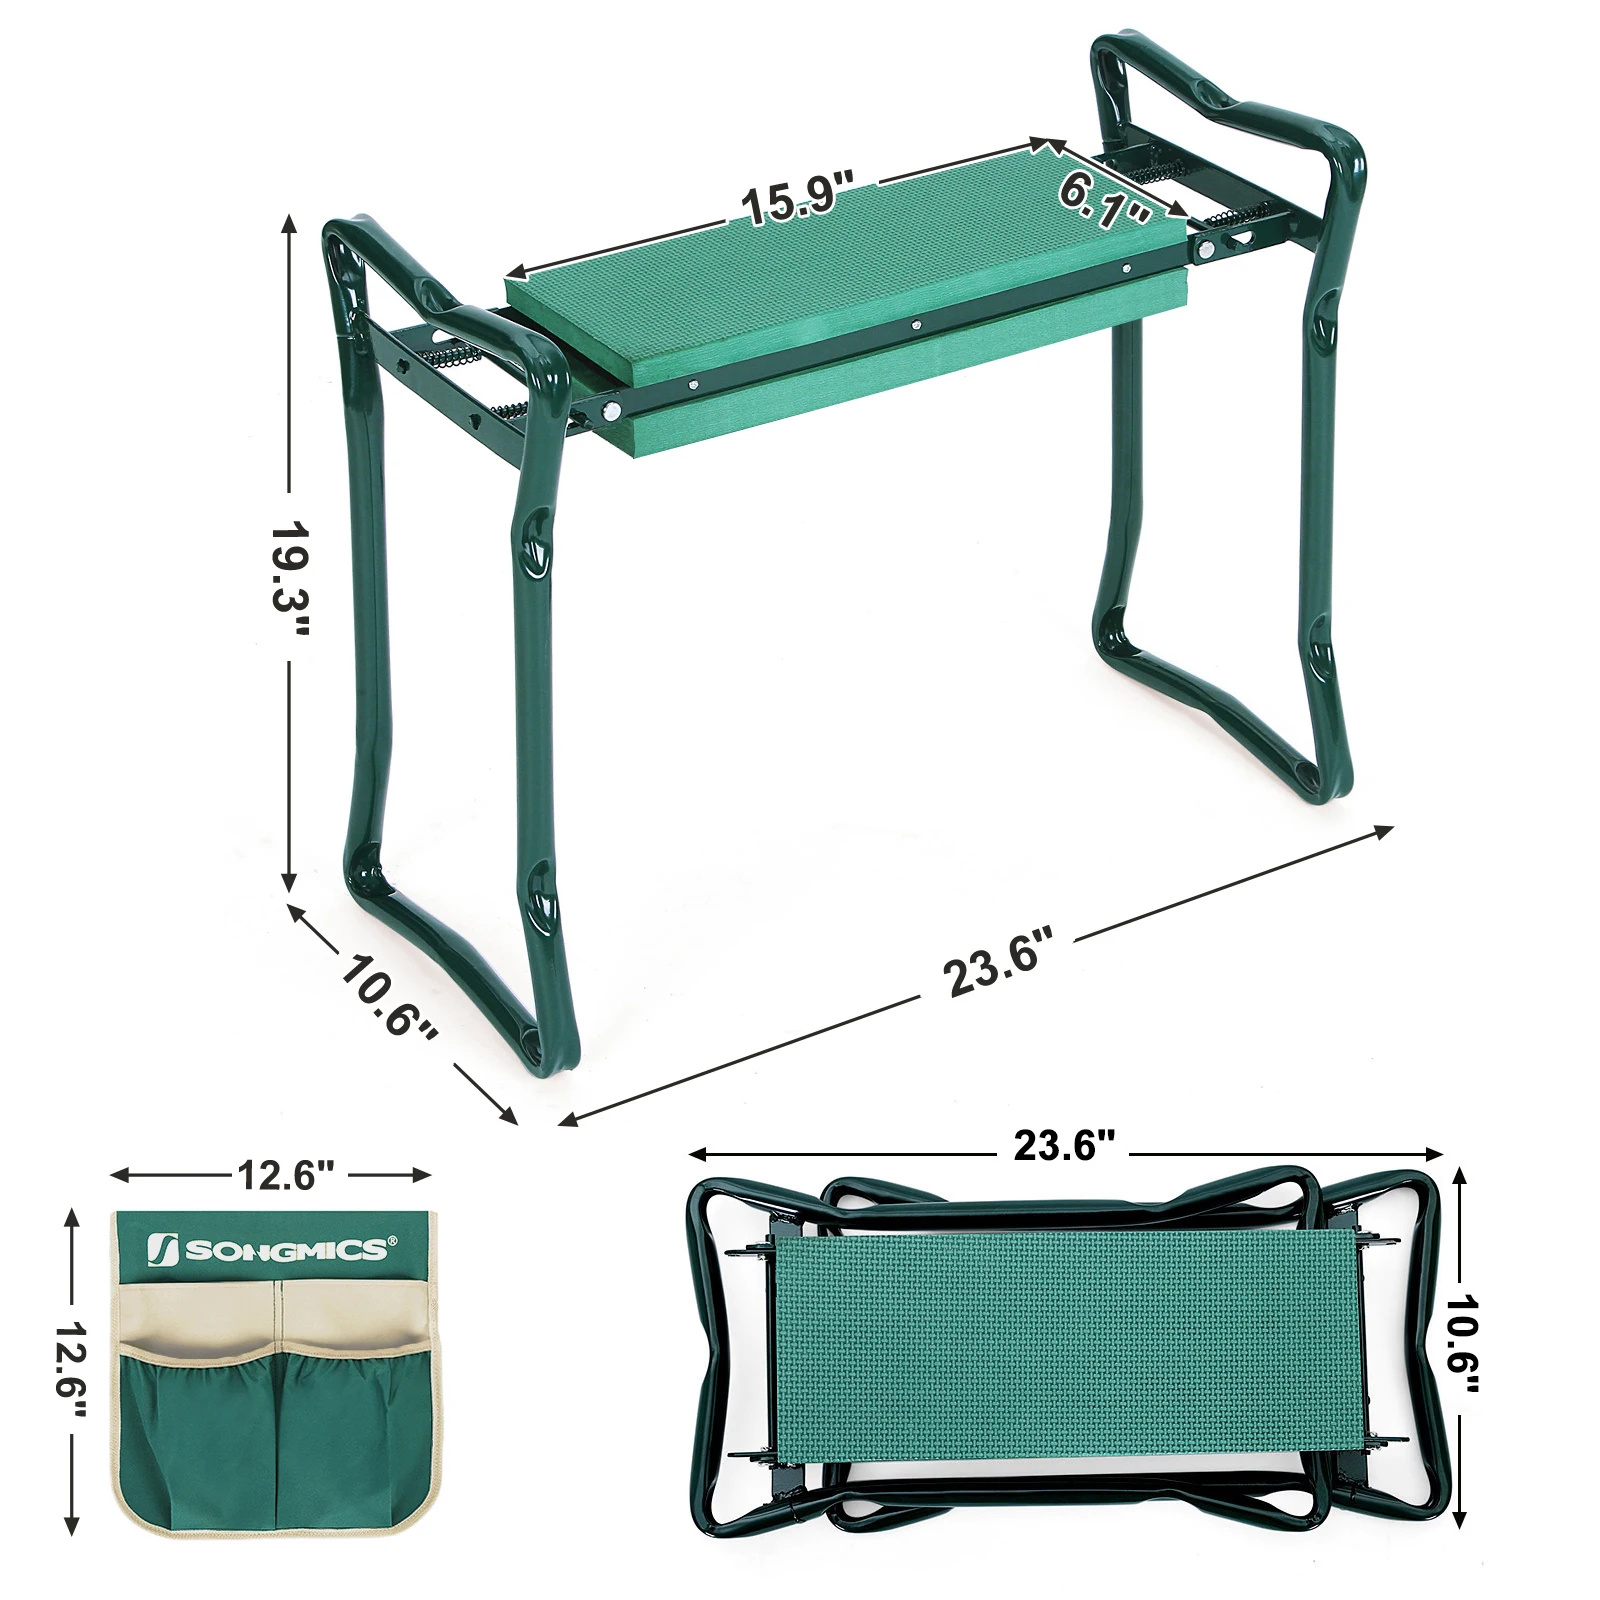 SONGMICS Garden Tools Heavy Duty Gardening Kneeling Bench with Tool Pouch Portable Foldable Garden Kneeler and Seat Stool